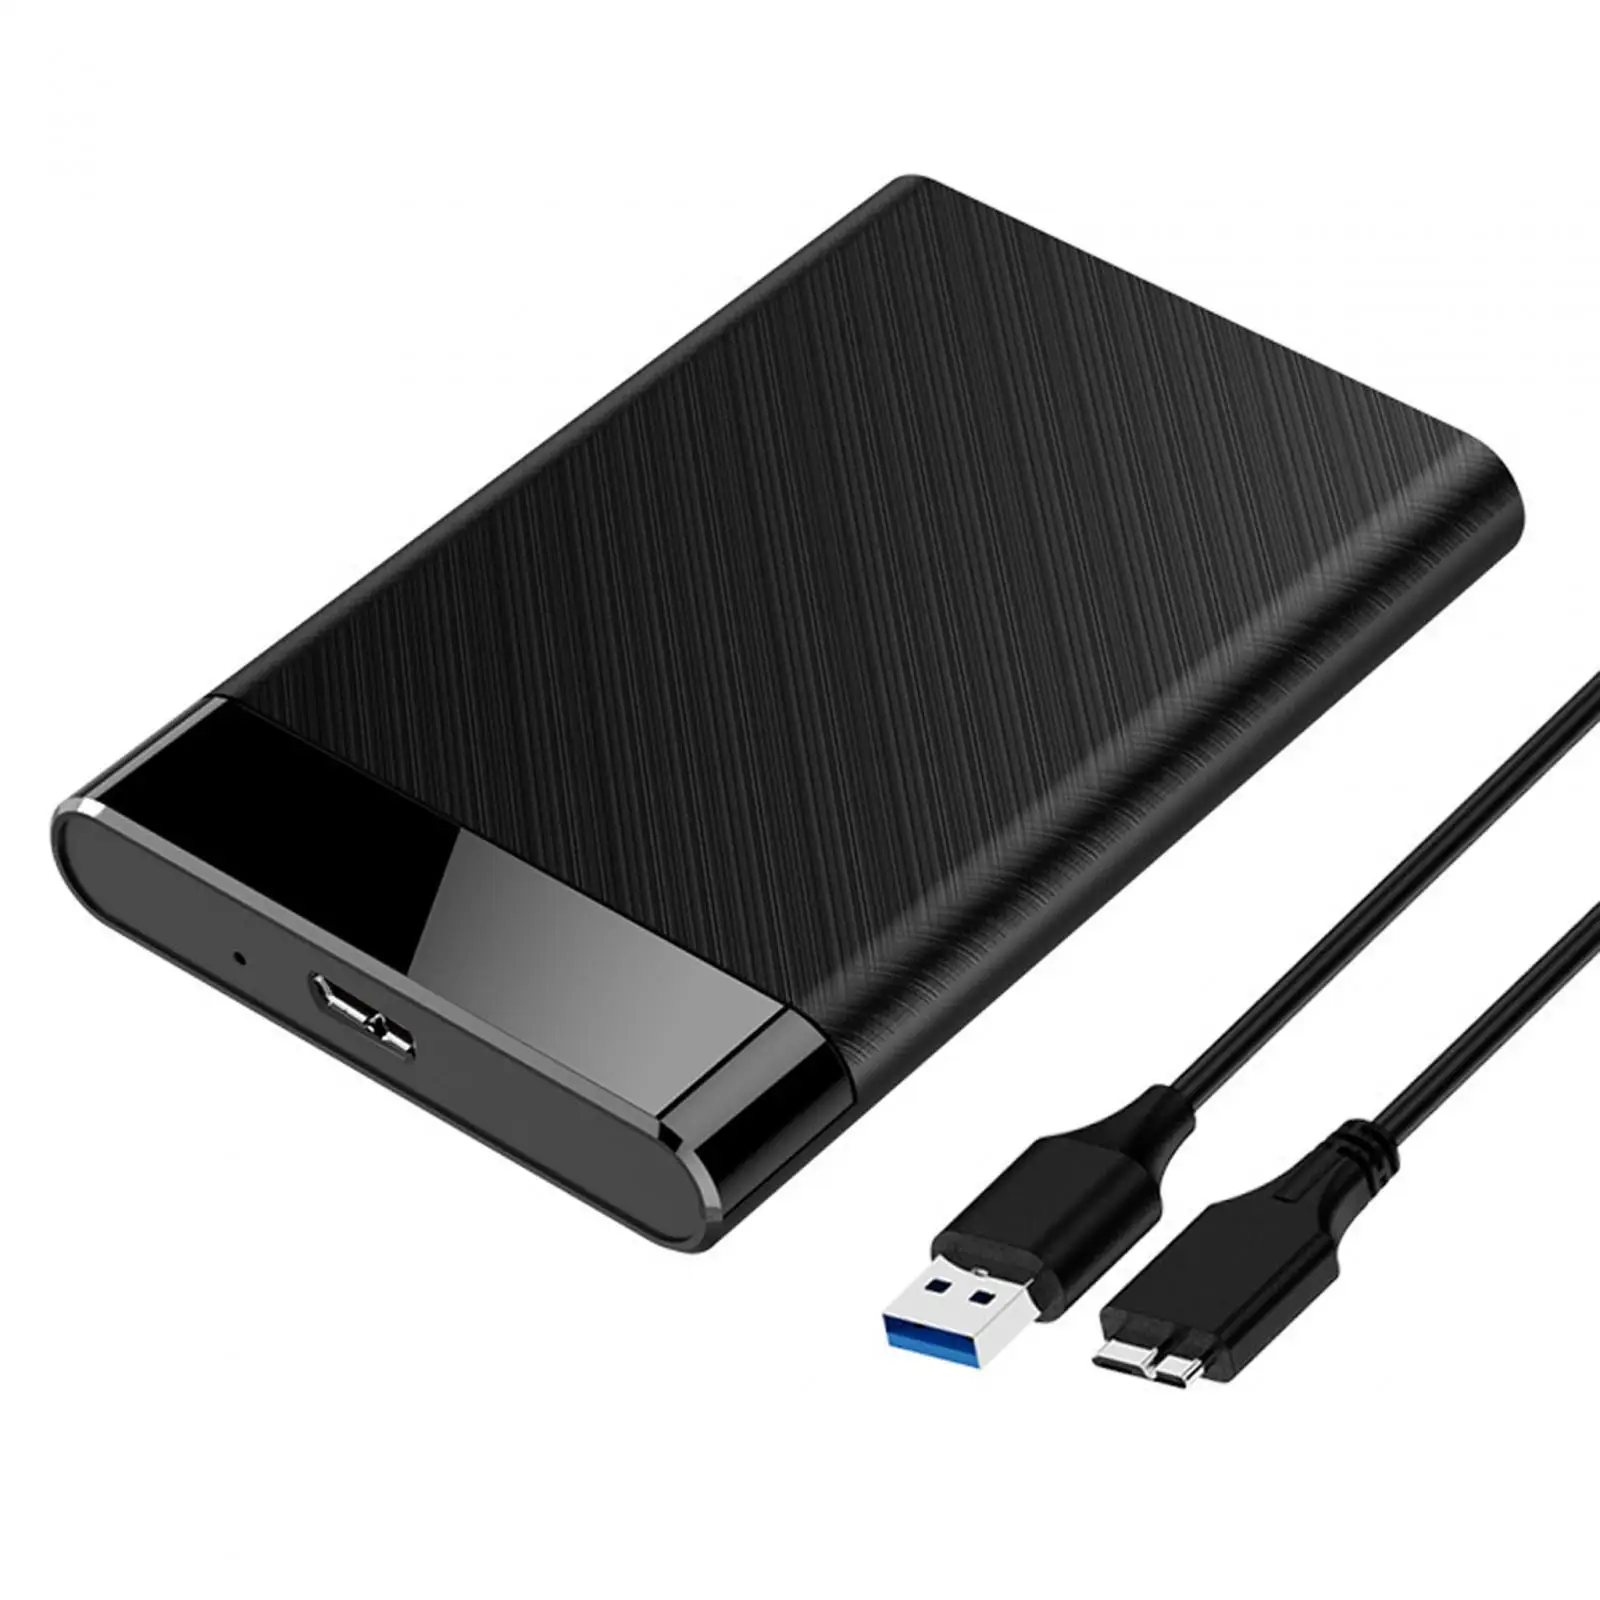 2.5inch External Hard Drive SATA to USB 3.0 SSD Enclosure Lightweight tool free for 2.5inch SSD Support for Laptop Accessories